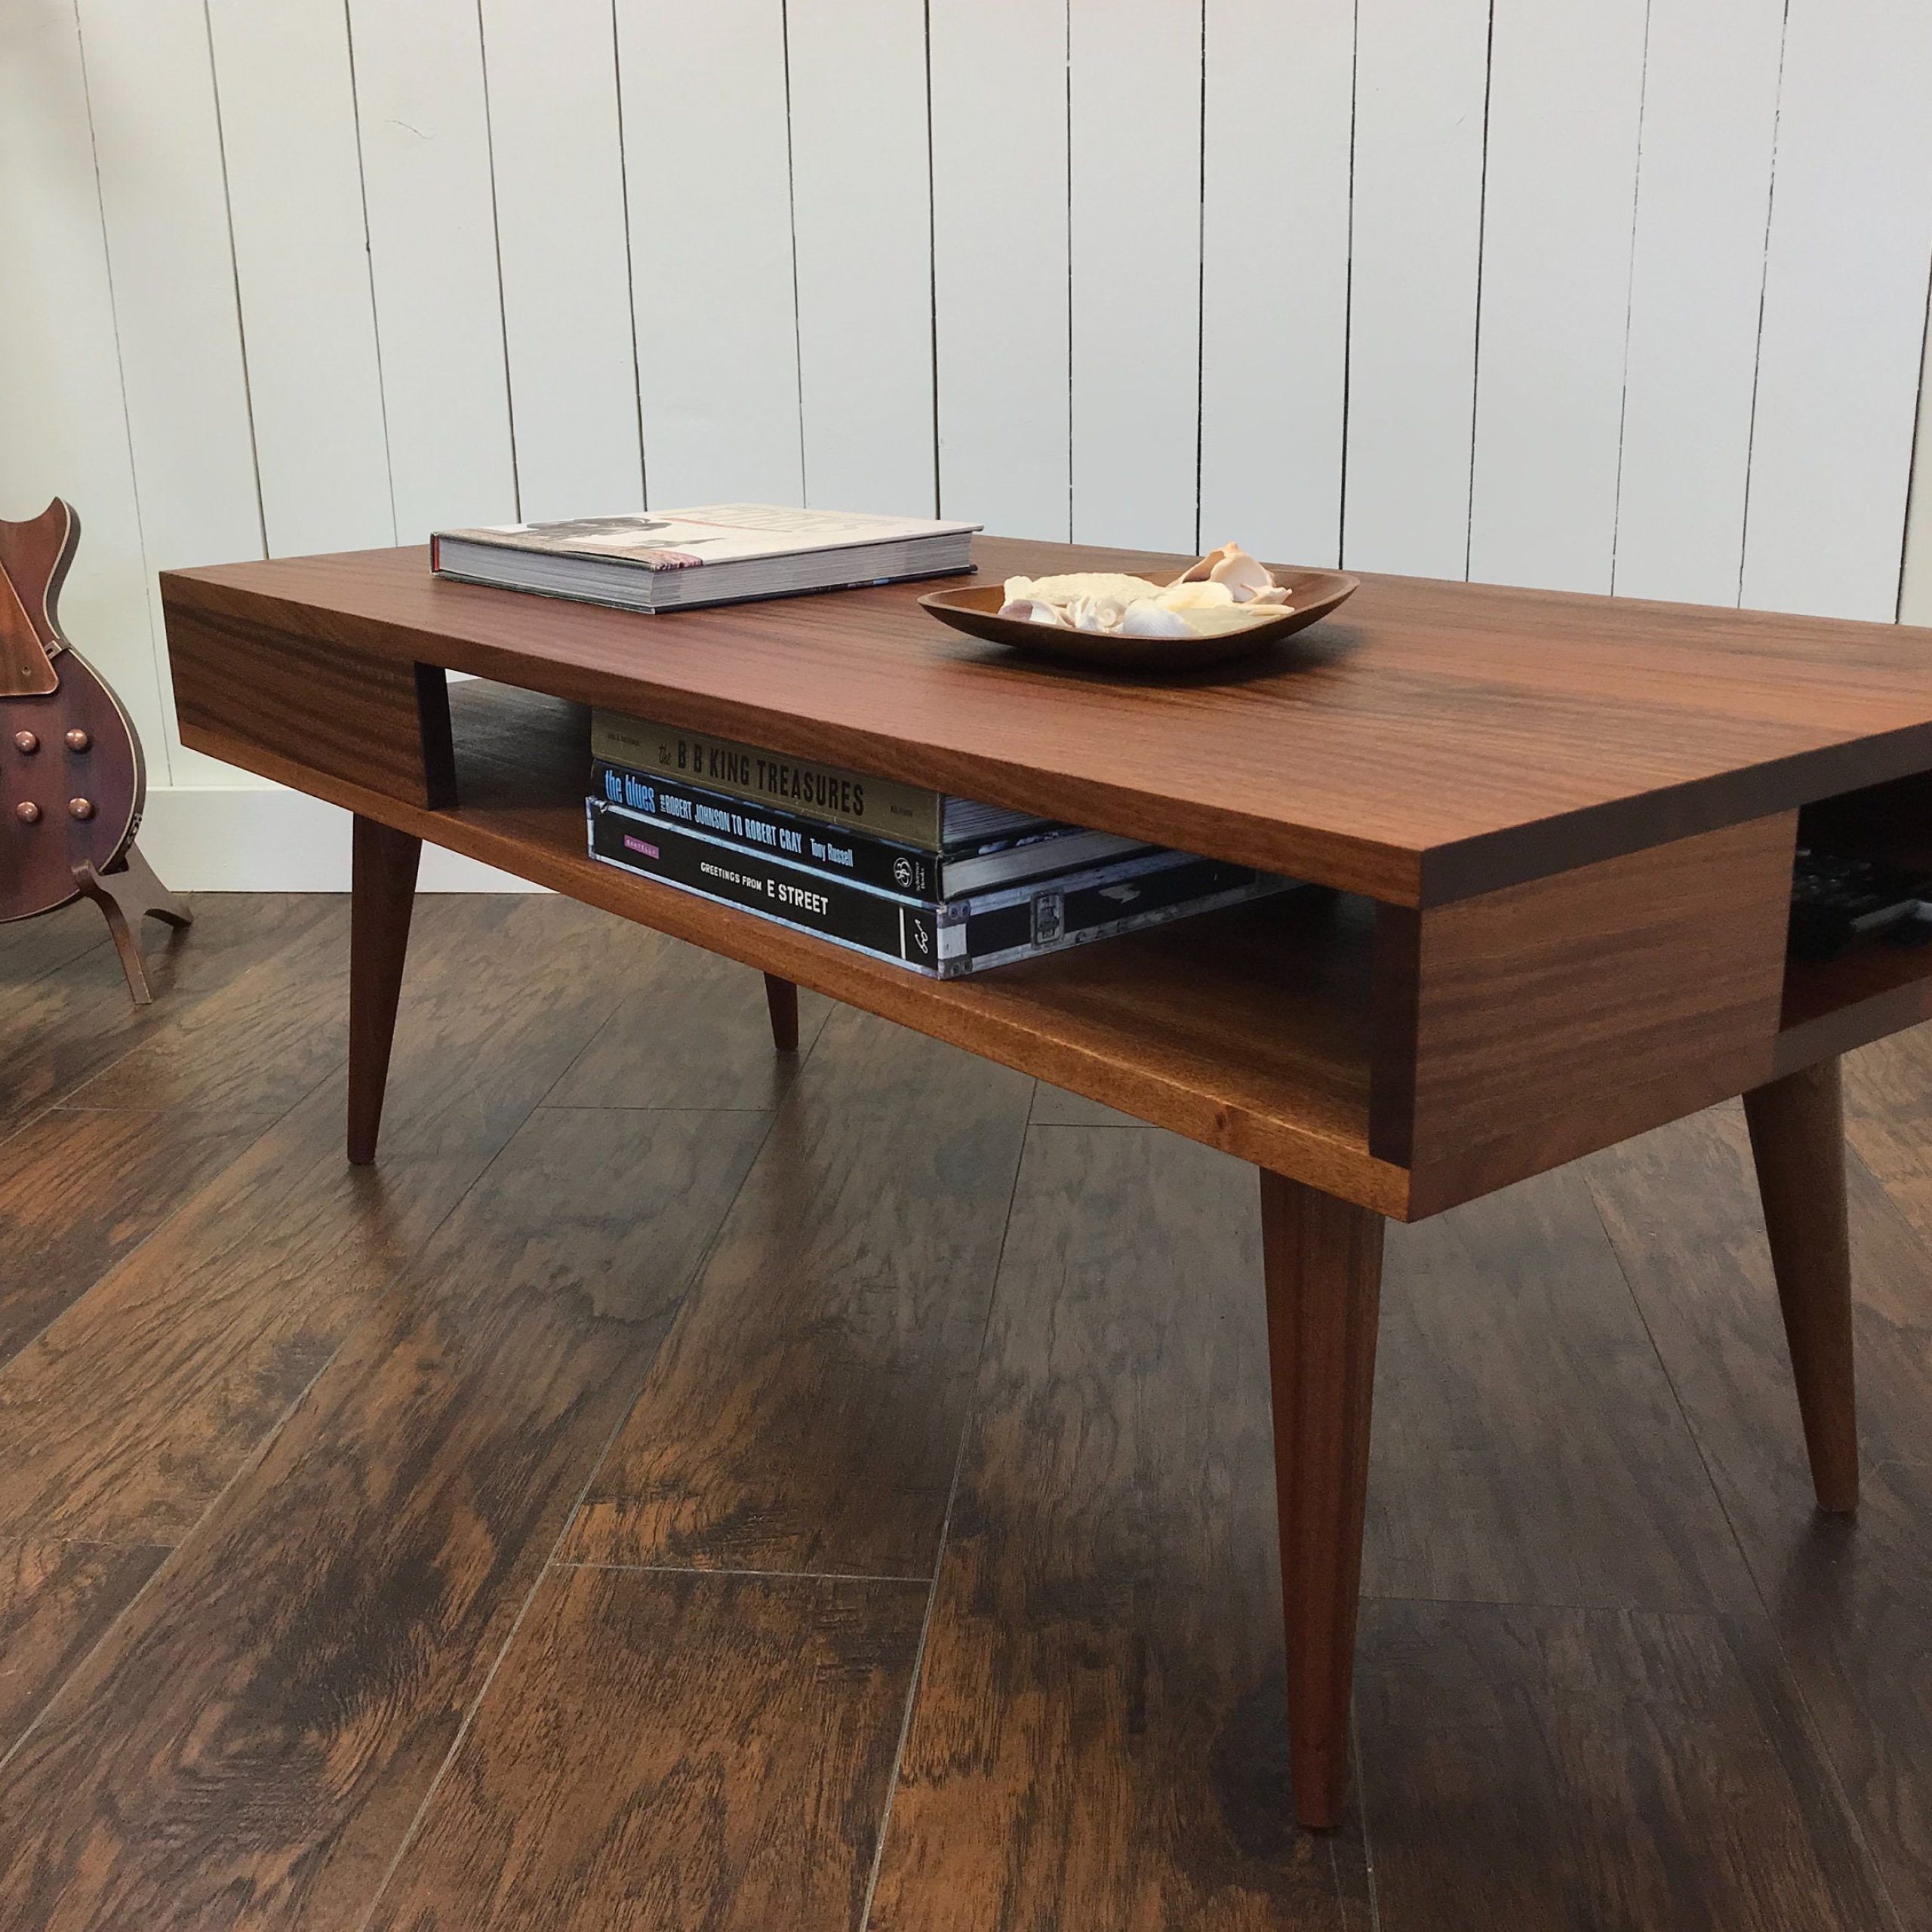 Thin Man Mid Century Modern Coffee Table With Storage In Mid Century Modern Coffee Tables (View 17 of 20)